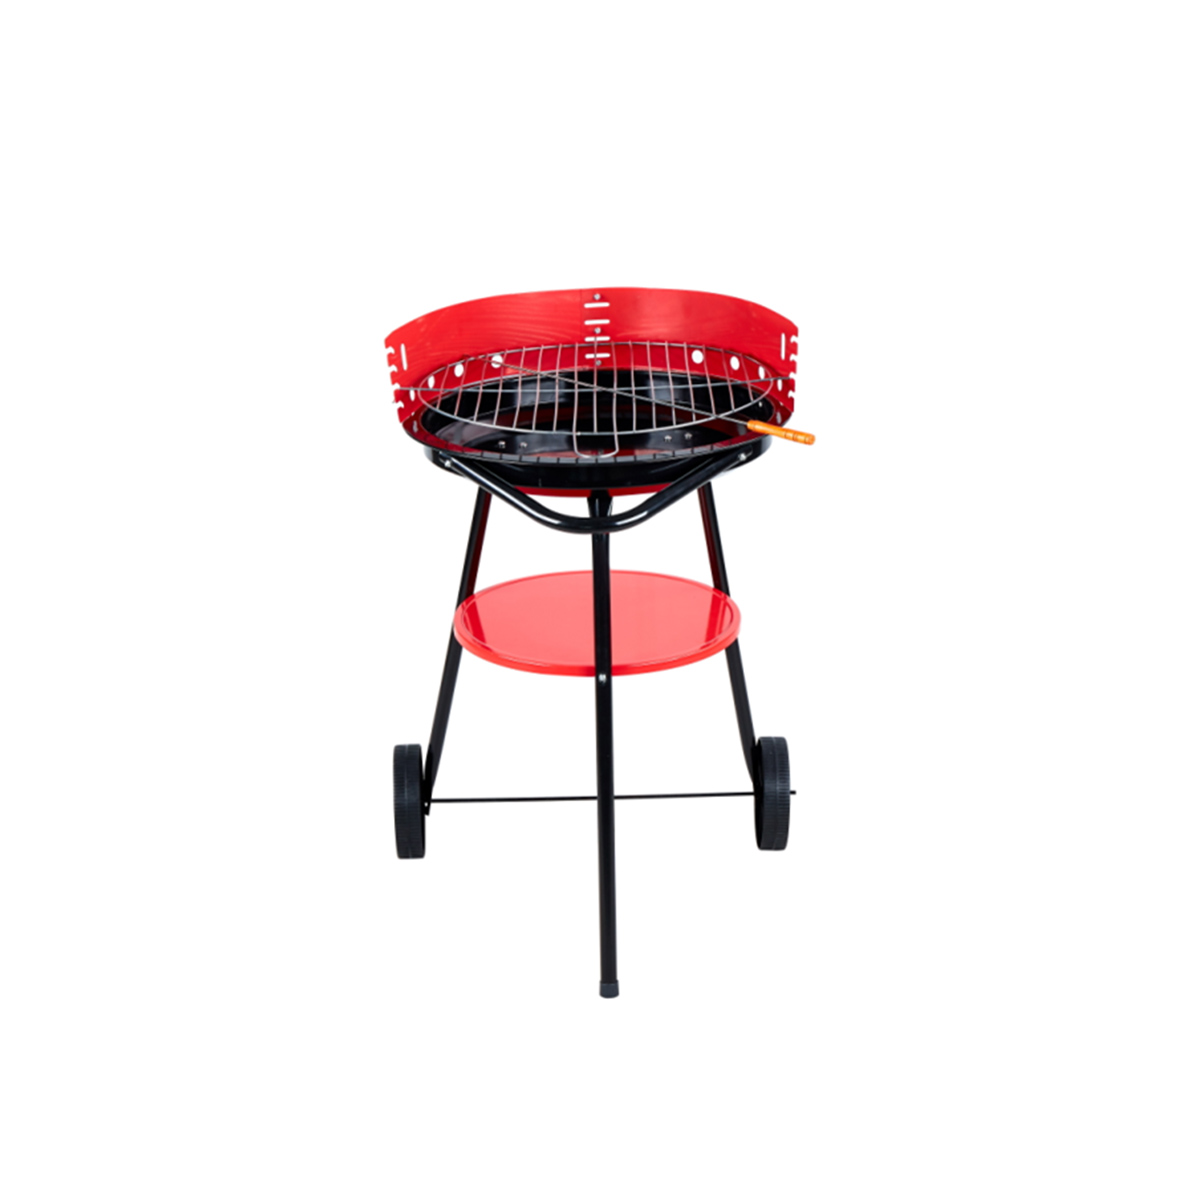 Iron-Charcoal-Meat-Grill-BBQ-Barbeque-with-wheels-Outdoor-Camping-Picnic-Stove-1754134